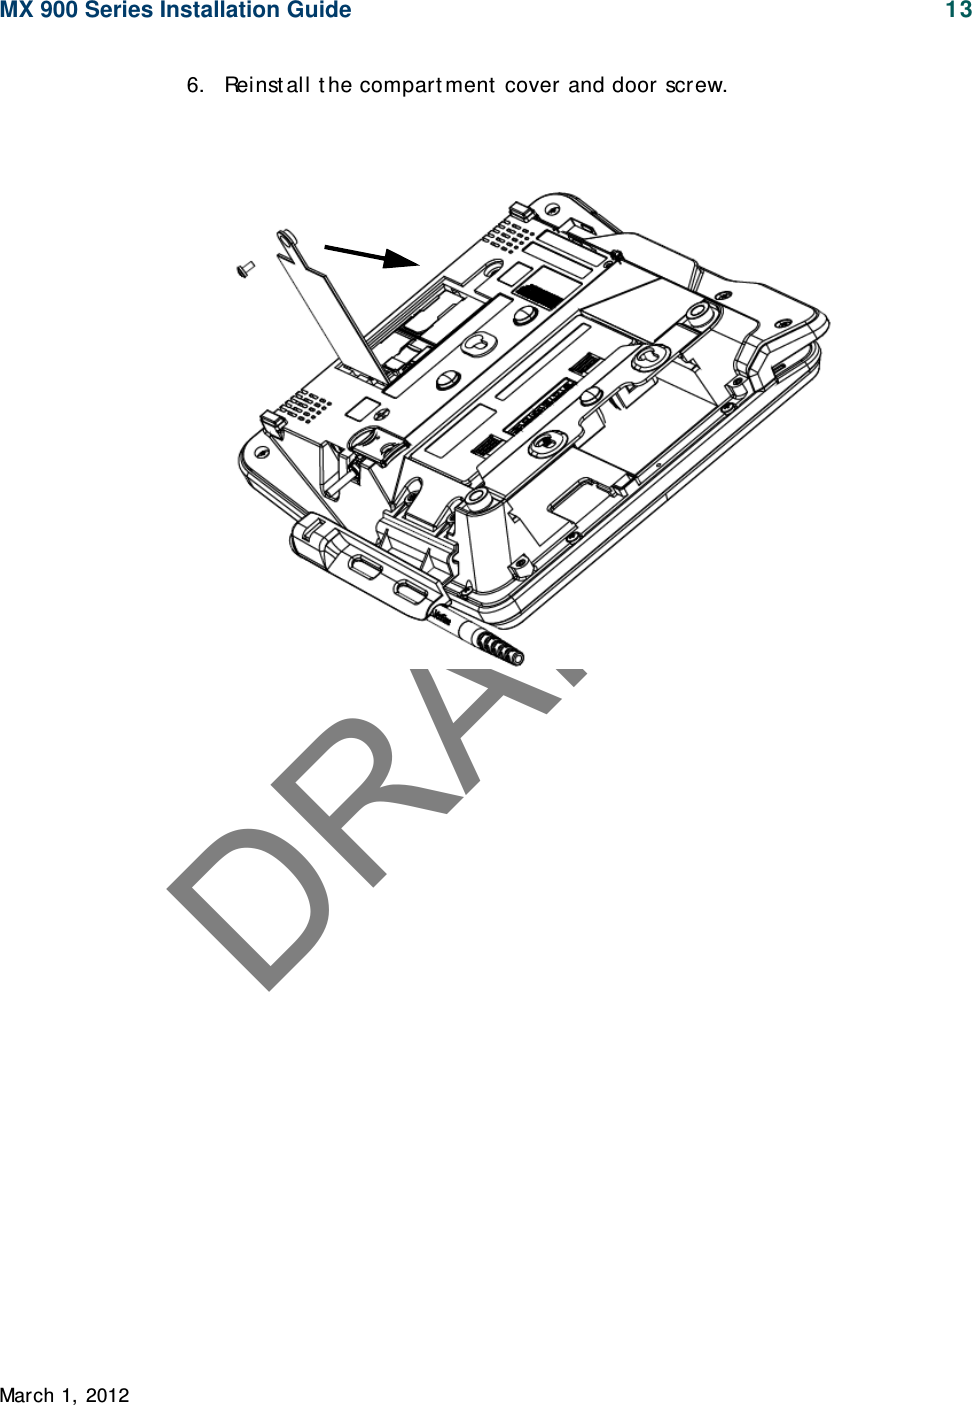 DRAFTMX 900 Series Installation Guide 13 March 1, 20126. Reinst all t he compart ment  cover and door screw.